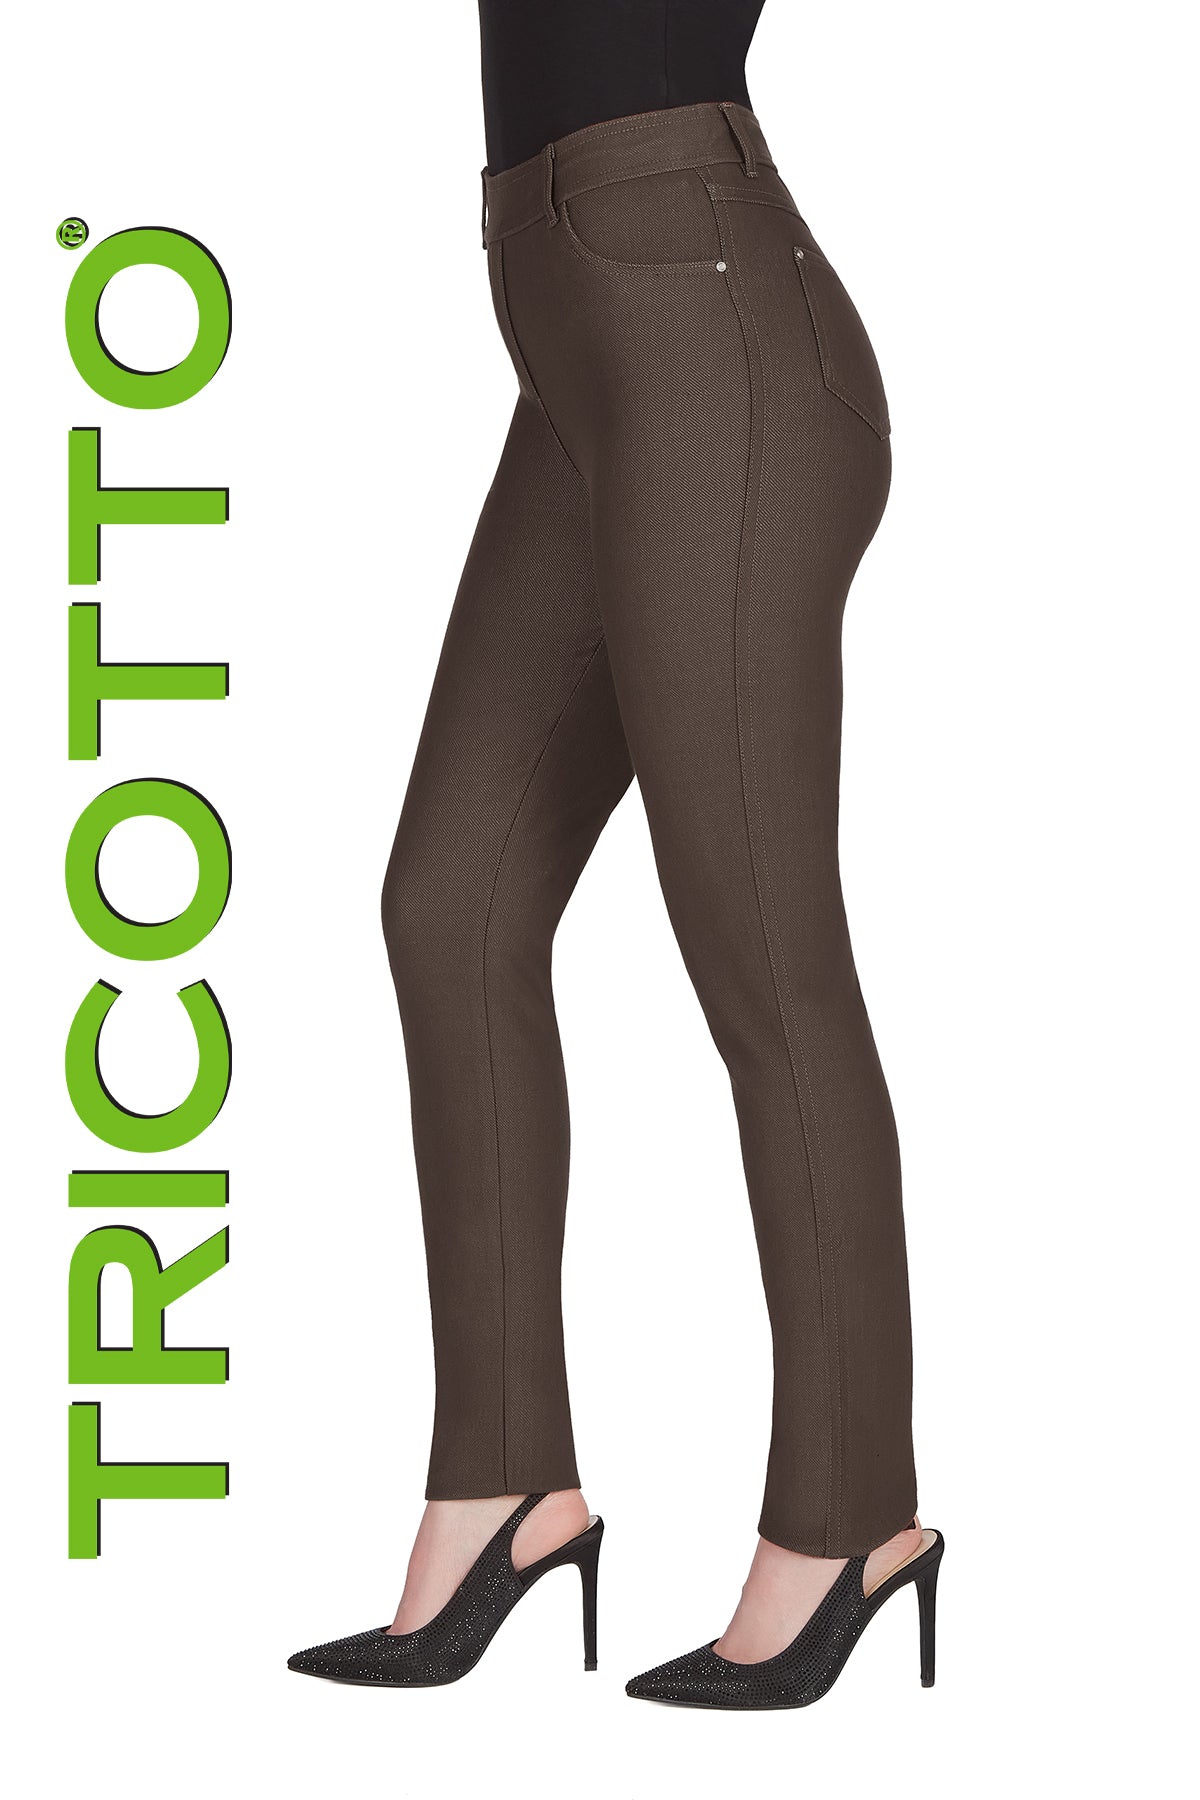 Tricotto Jeans-Tricotto Jeggings-Tricotto Fashion Montreal-Tricotto Fashion Quebec-Tricotto Online Shop